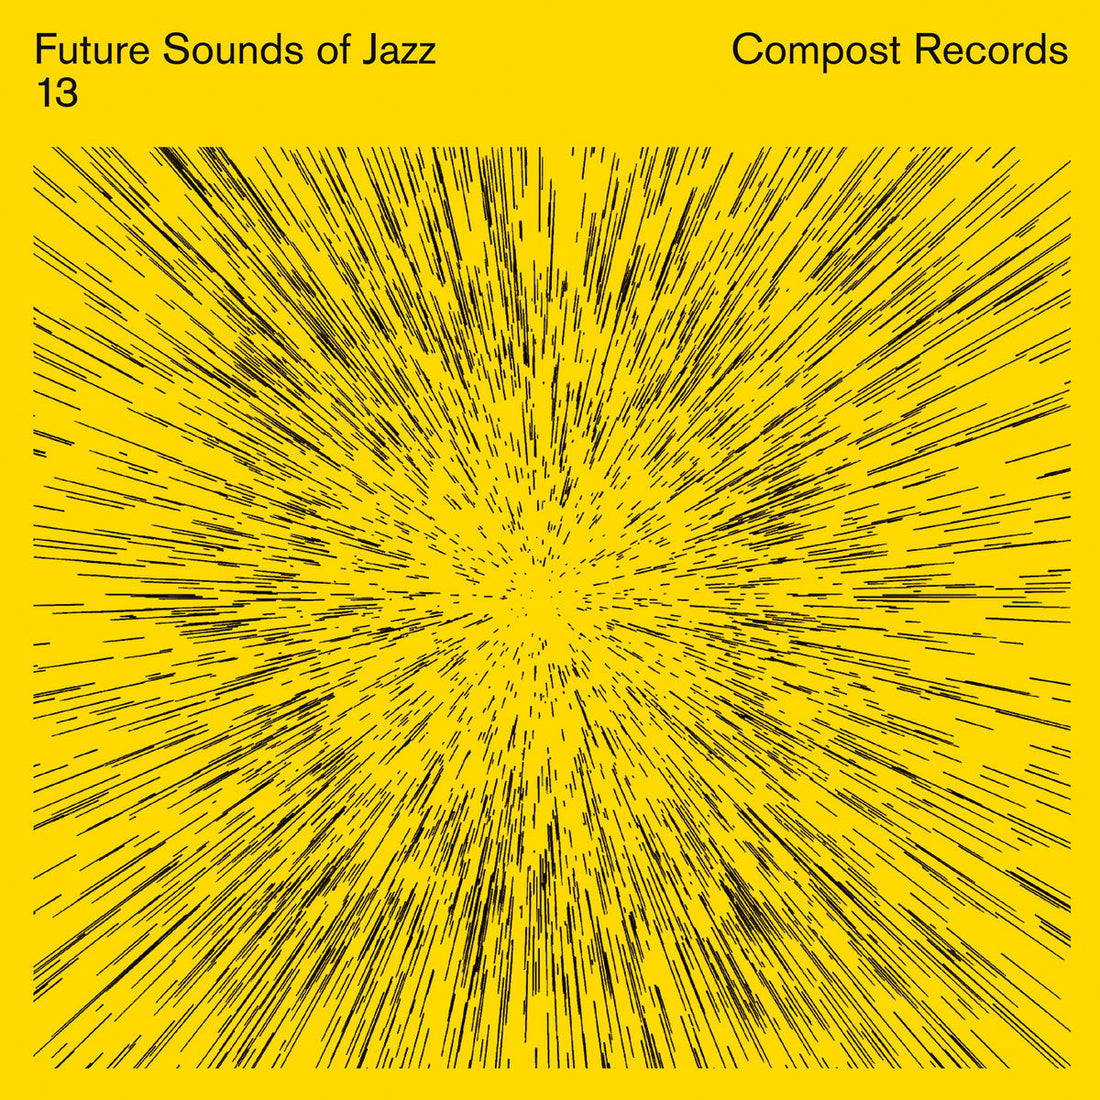 Long Running Compilation 'Future Sounds Of Jazz' Gets Its 13th Volume